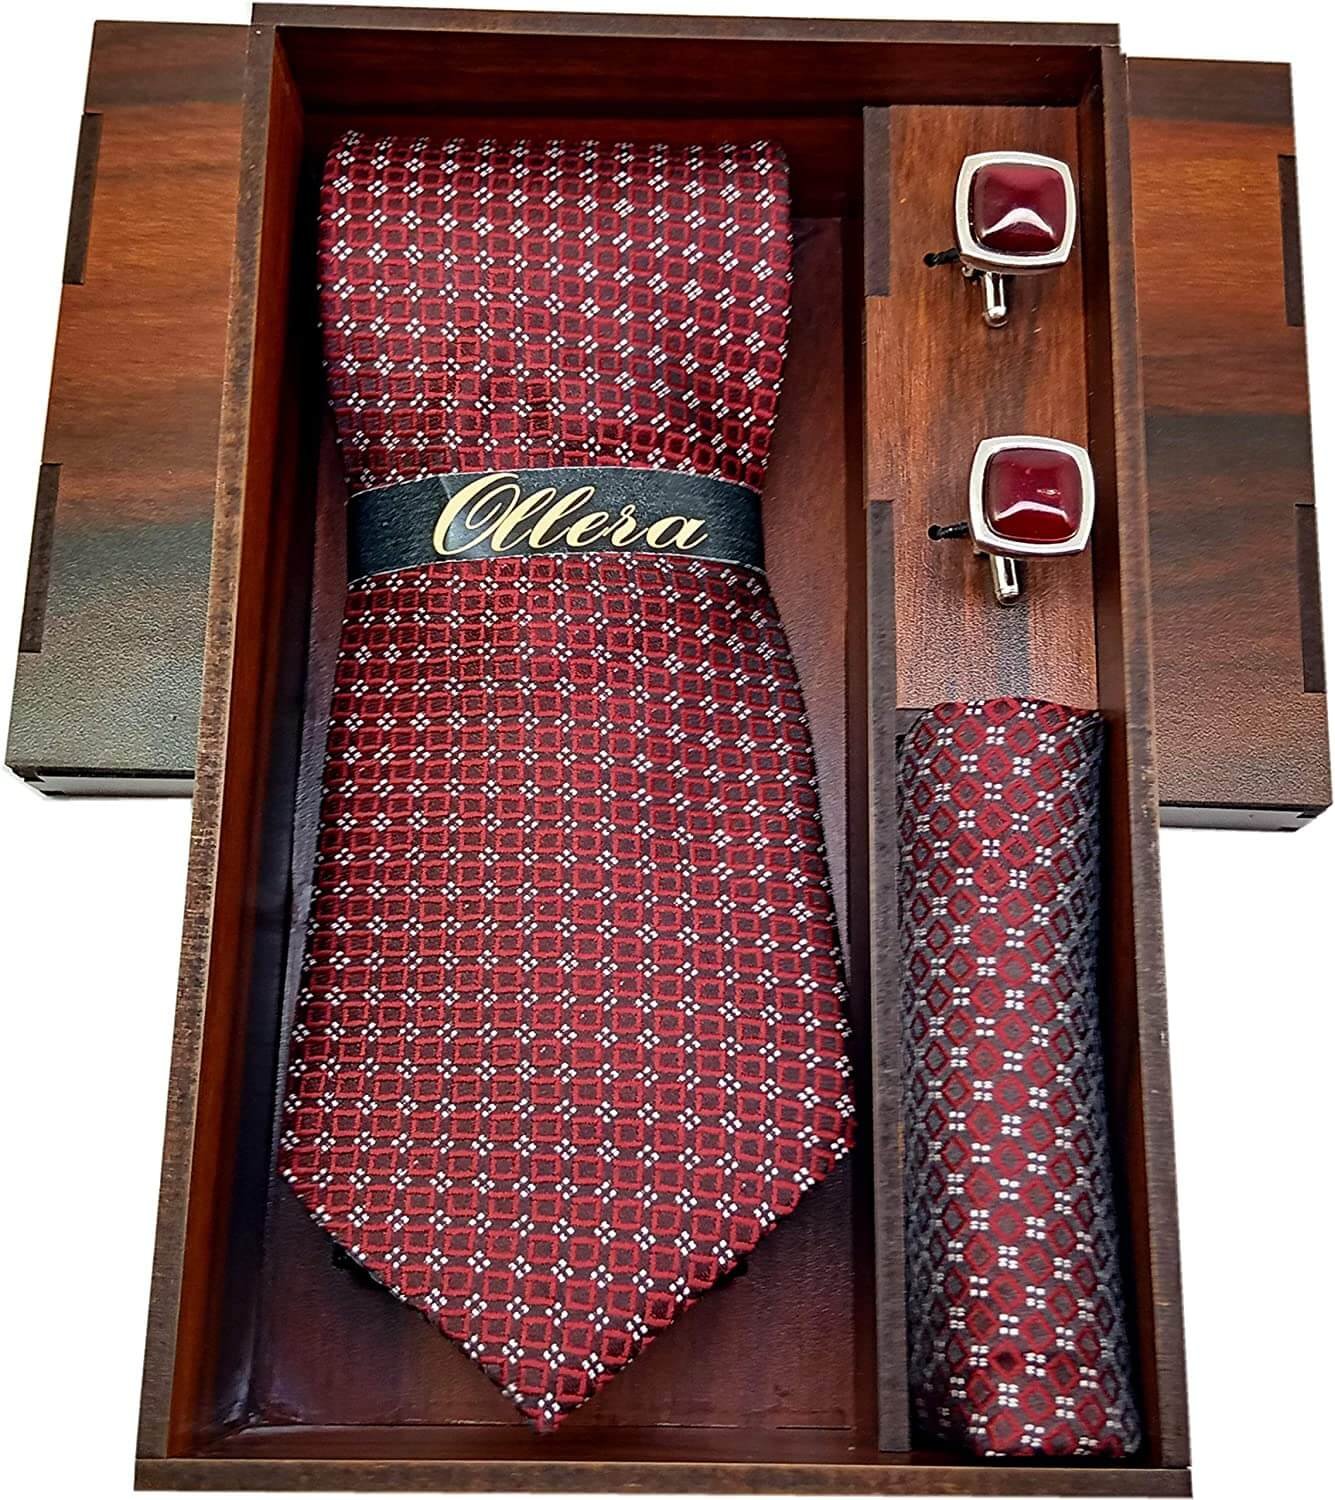 Ollera Men Premium Neck Tie and Pocket Square with Cufflink Combo Gift Set in Premium Wooden Box(Maroon, Free Size)